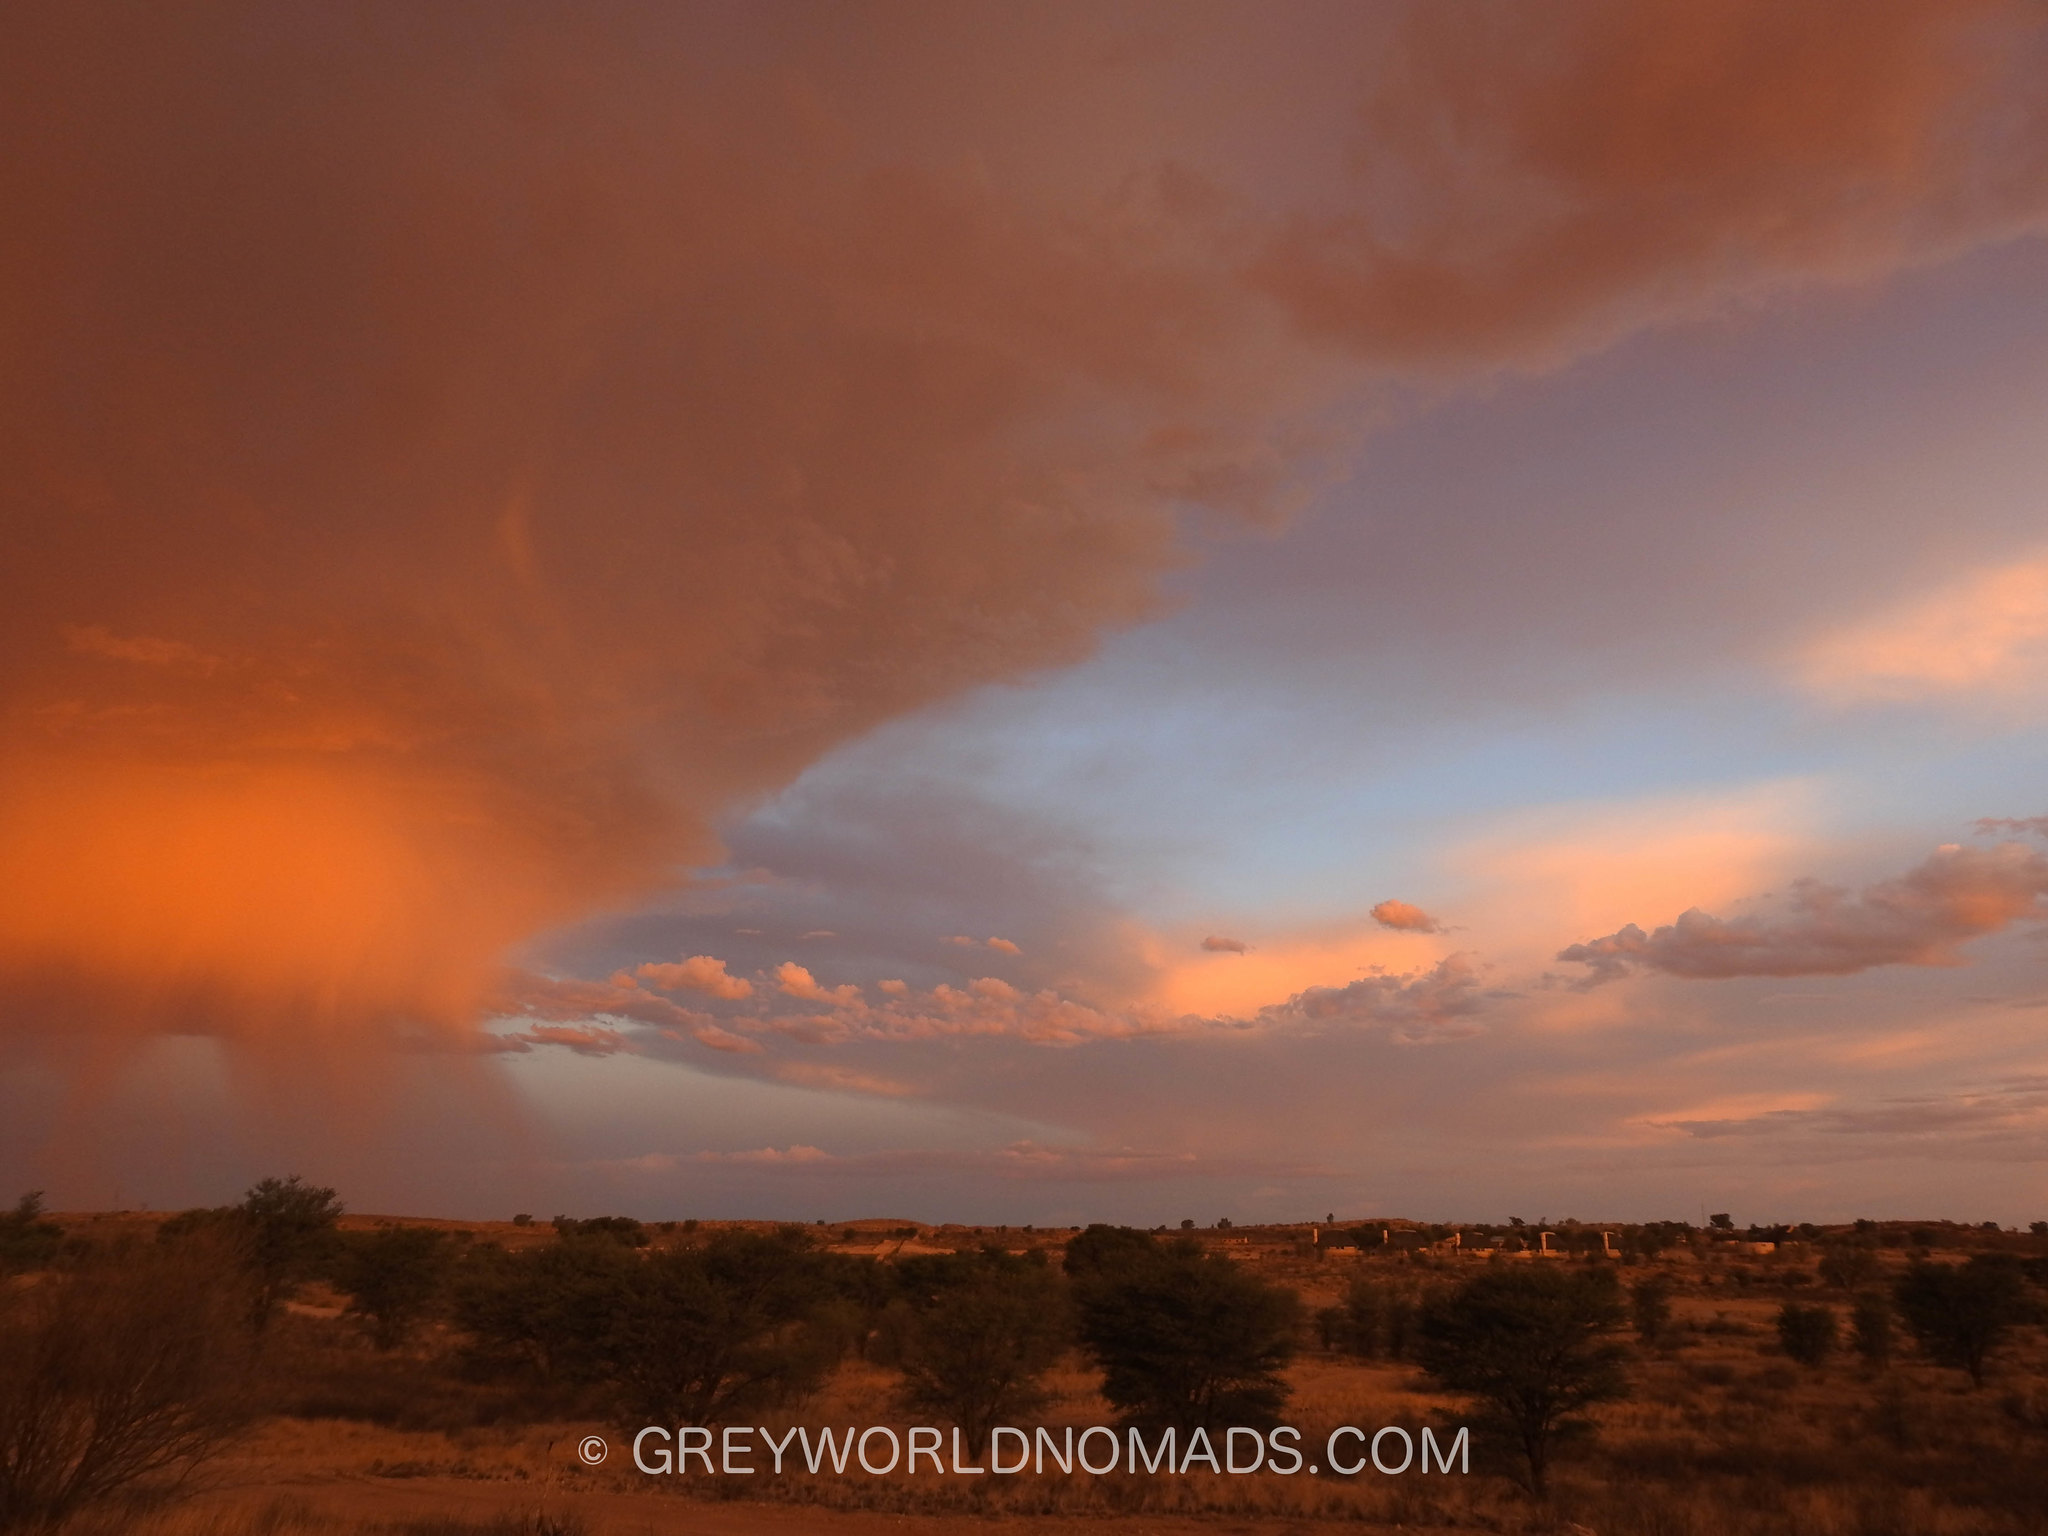 Approaching Thunderstorm in the Kgalagadi